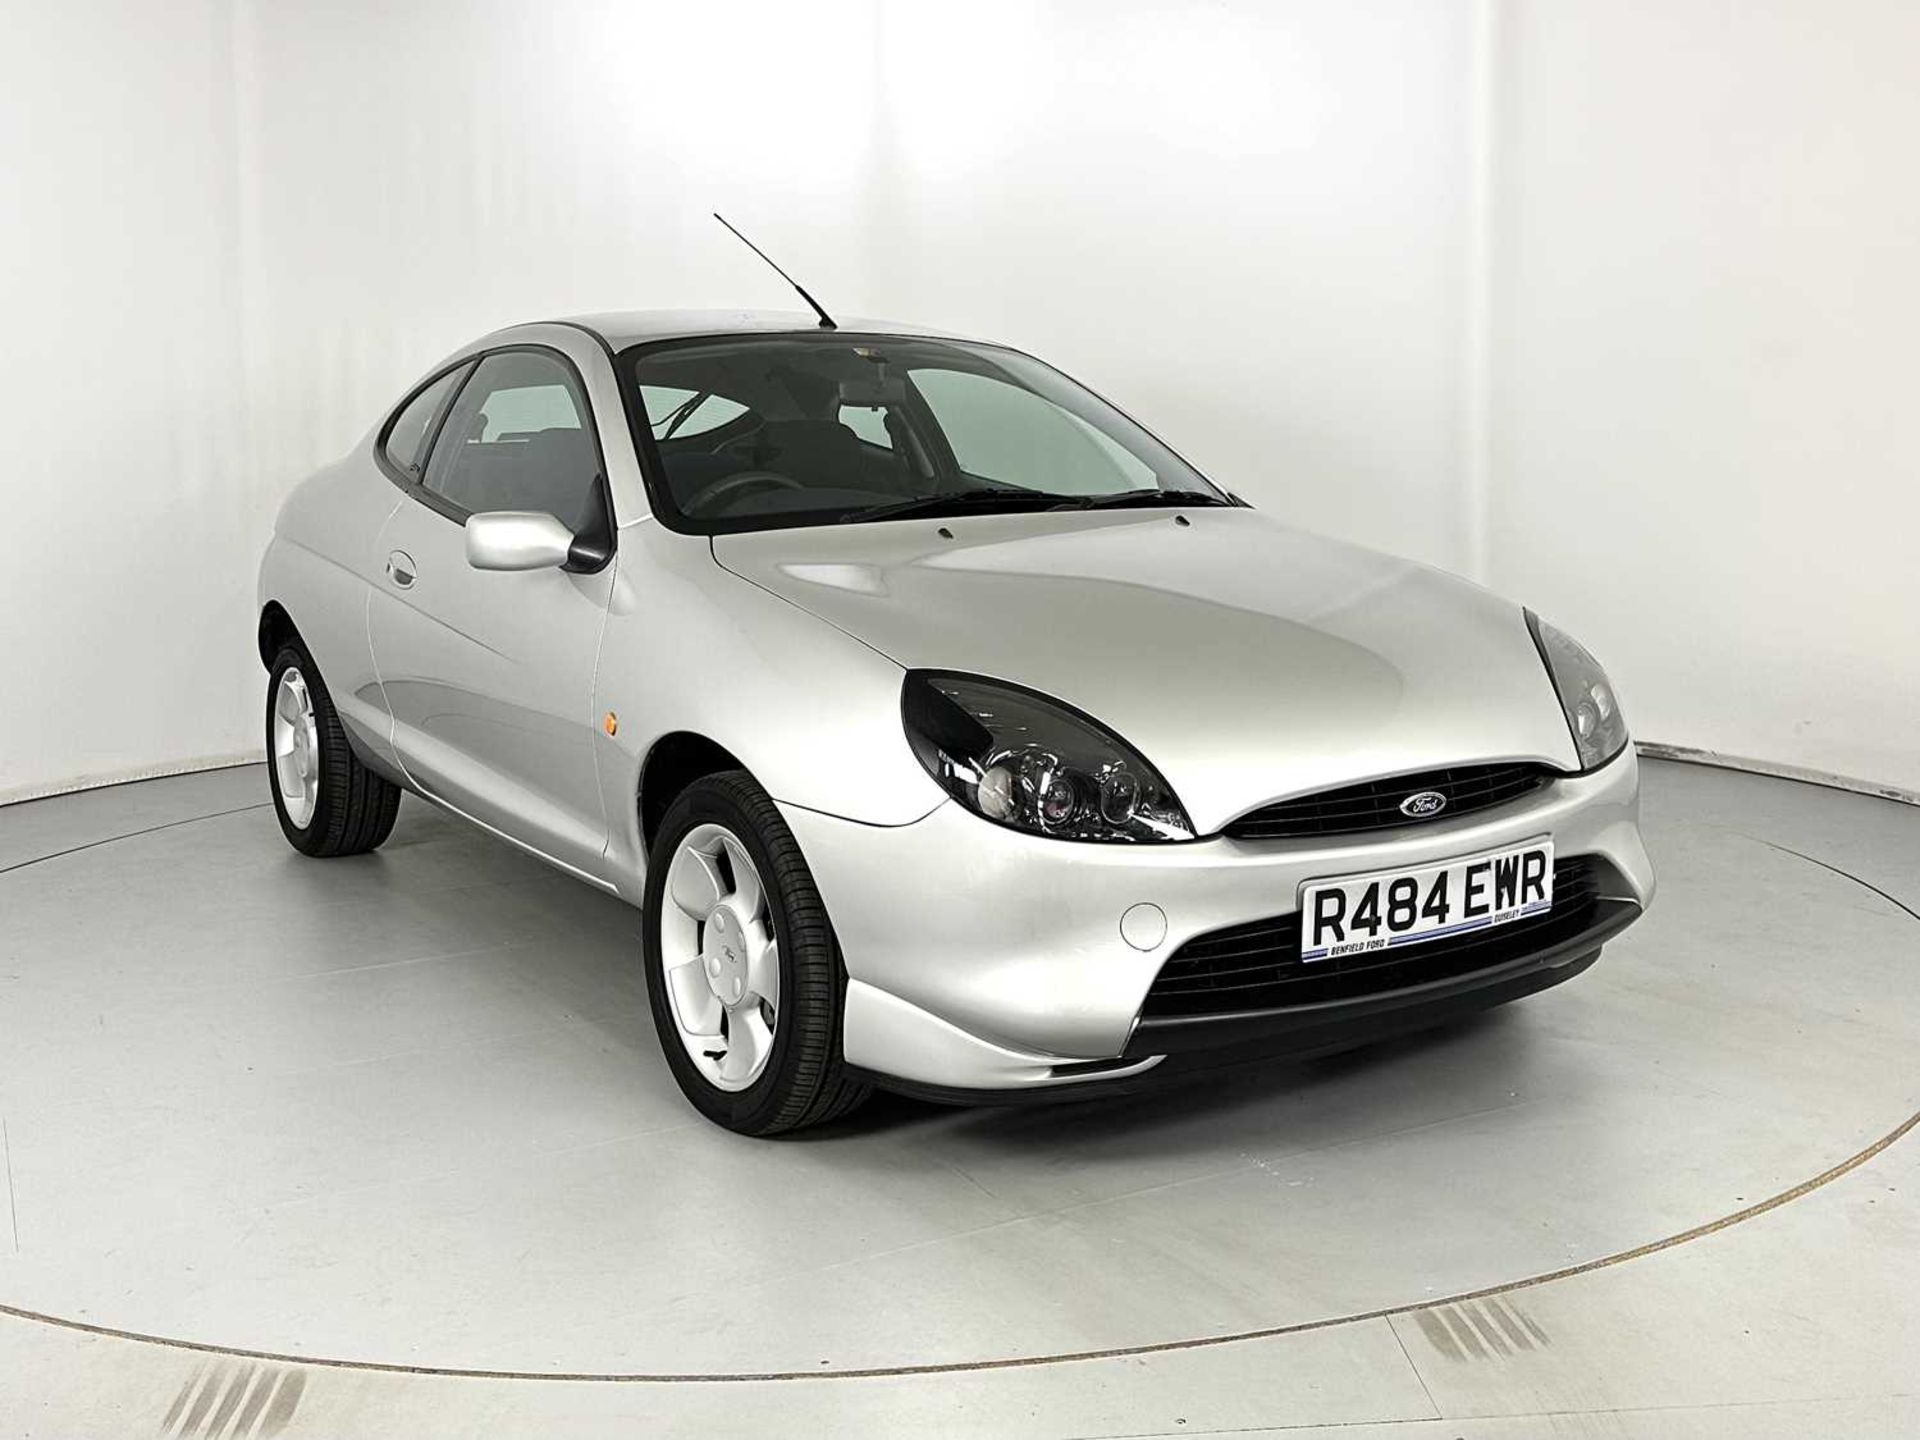 1997 Ford Puma Only 9,000 miles from new!